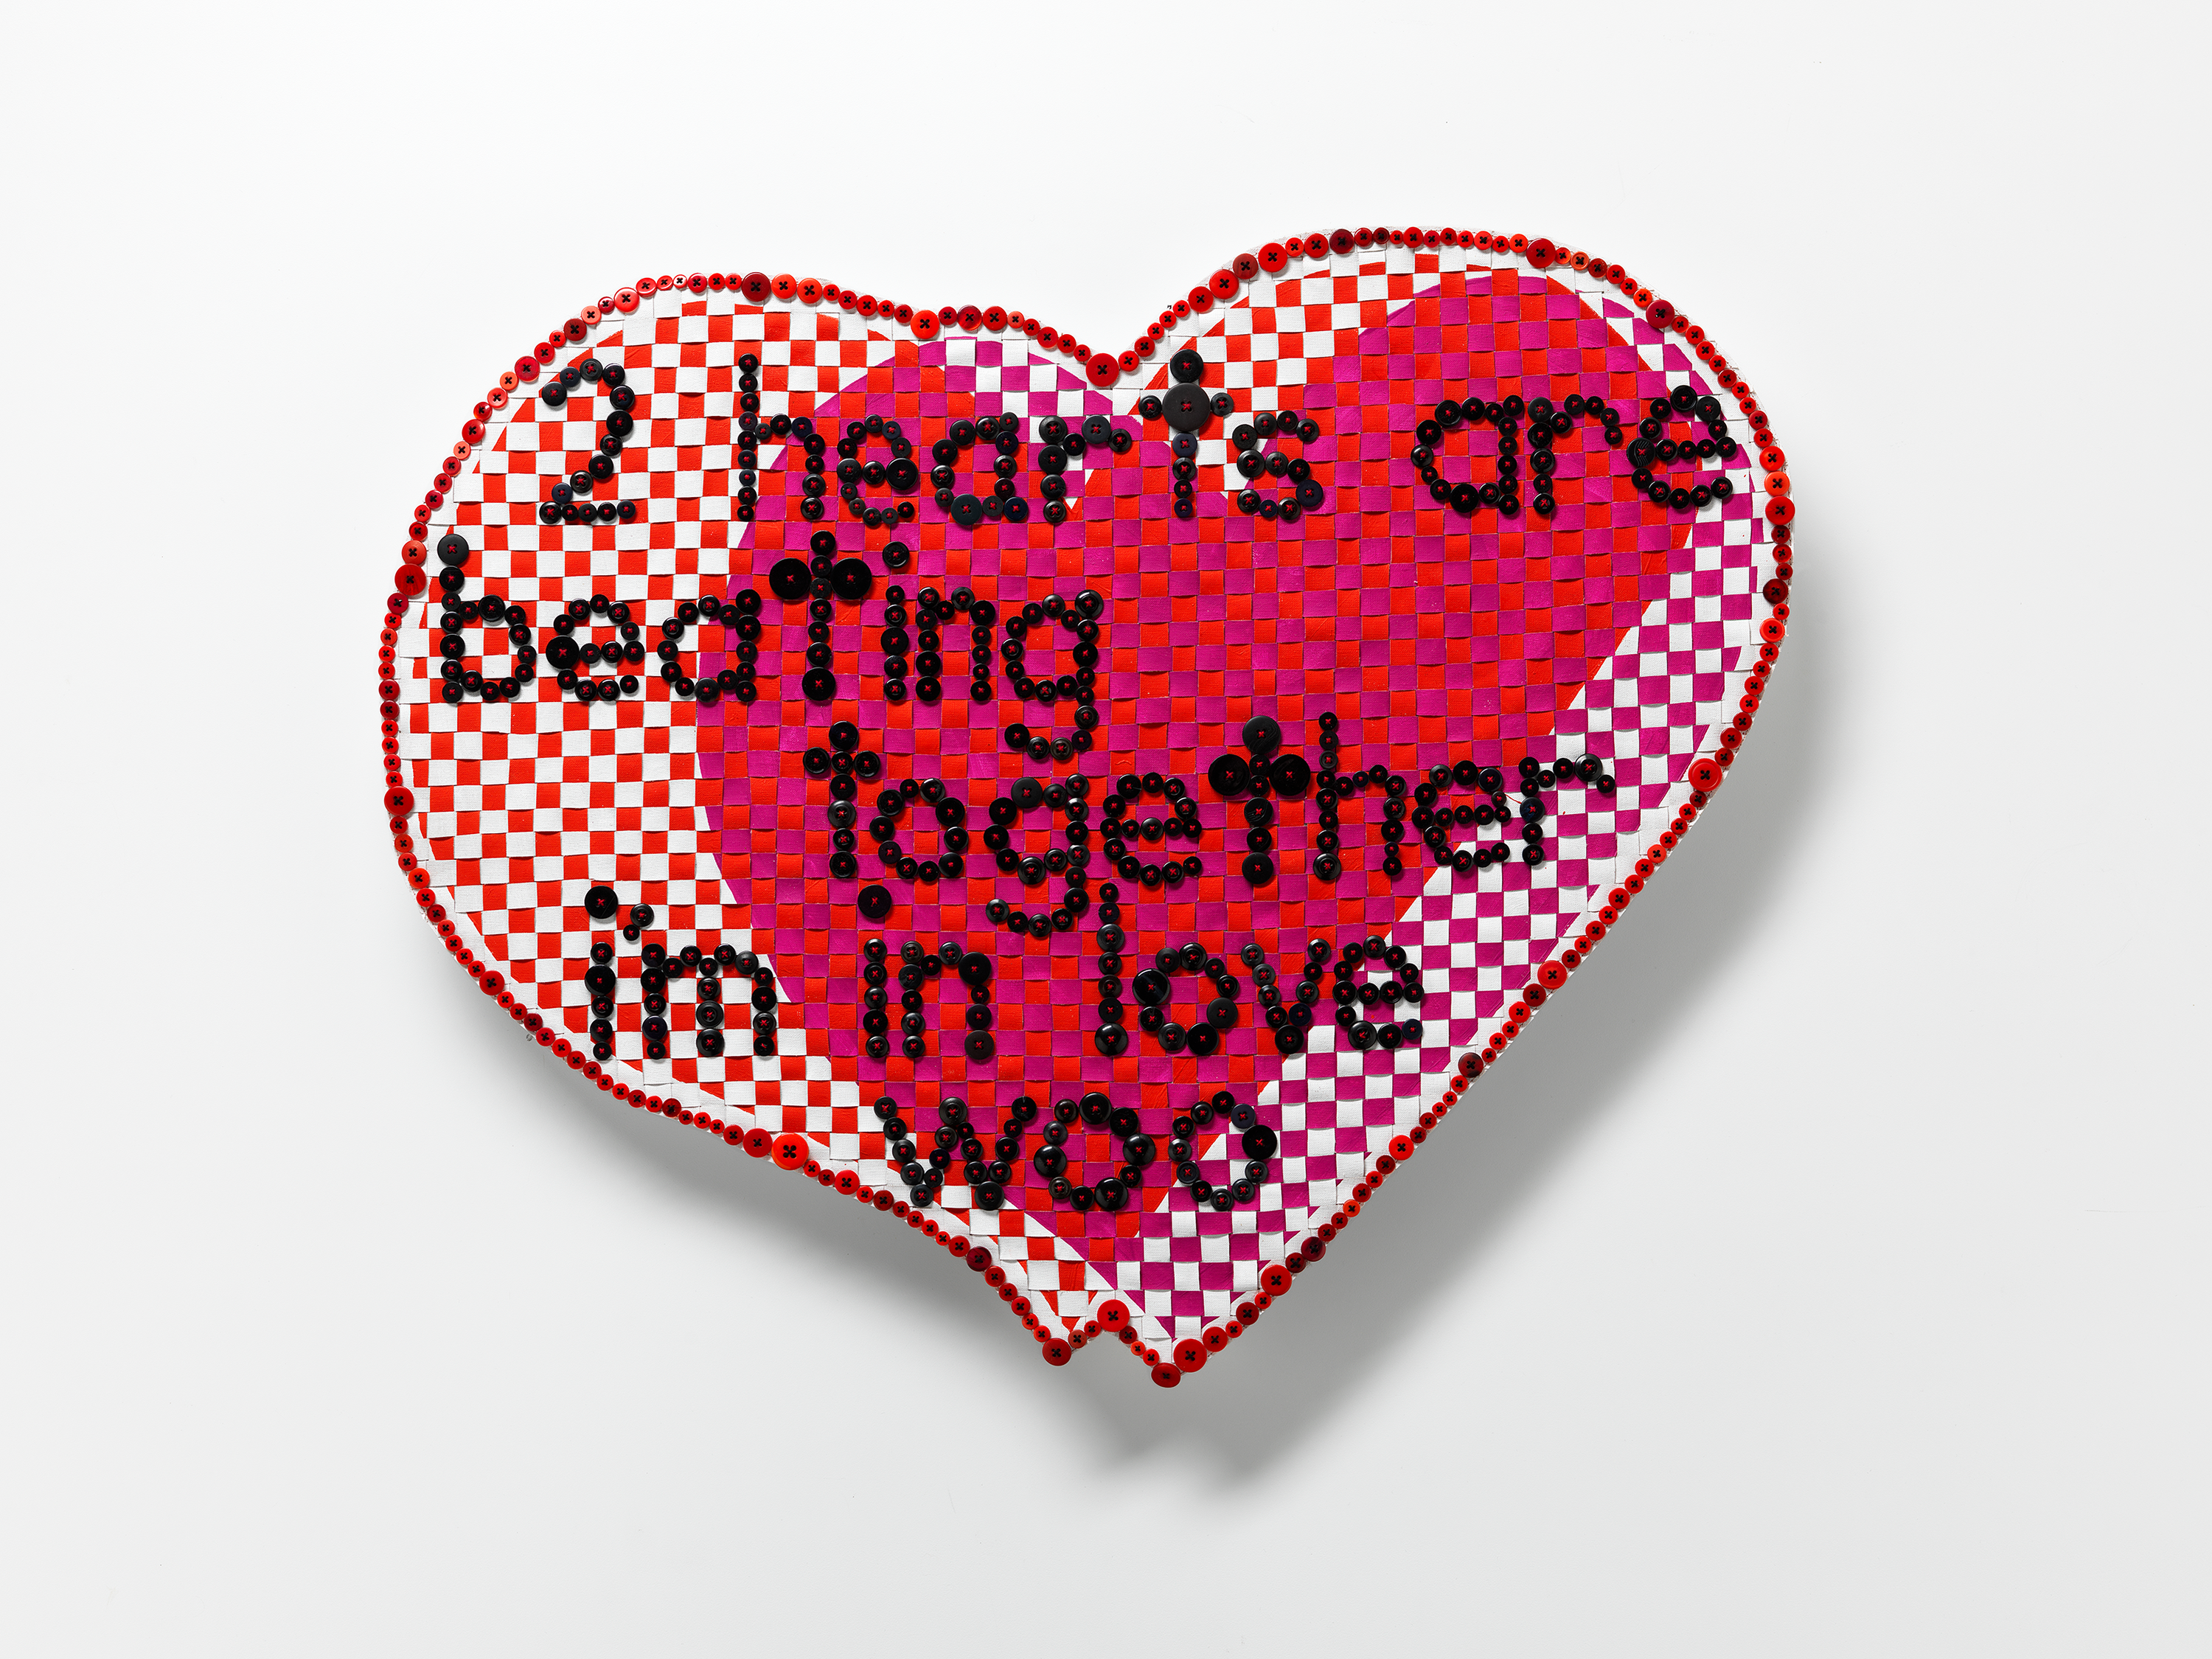 Troy-Anthony BAYLIS, 'Two Hearts (Kylie Minogue)' 2022, sliced and rewoven acrylic on linen, embroidery cotton, buttons. Courtesy of the artist. Photo: Grant Hancock.